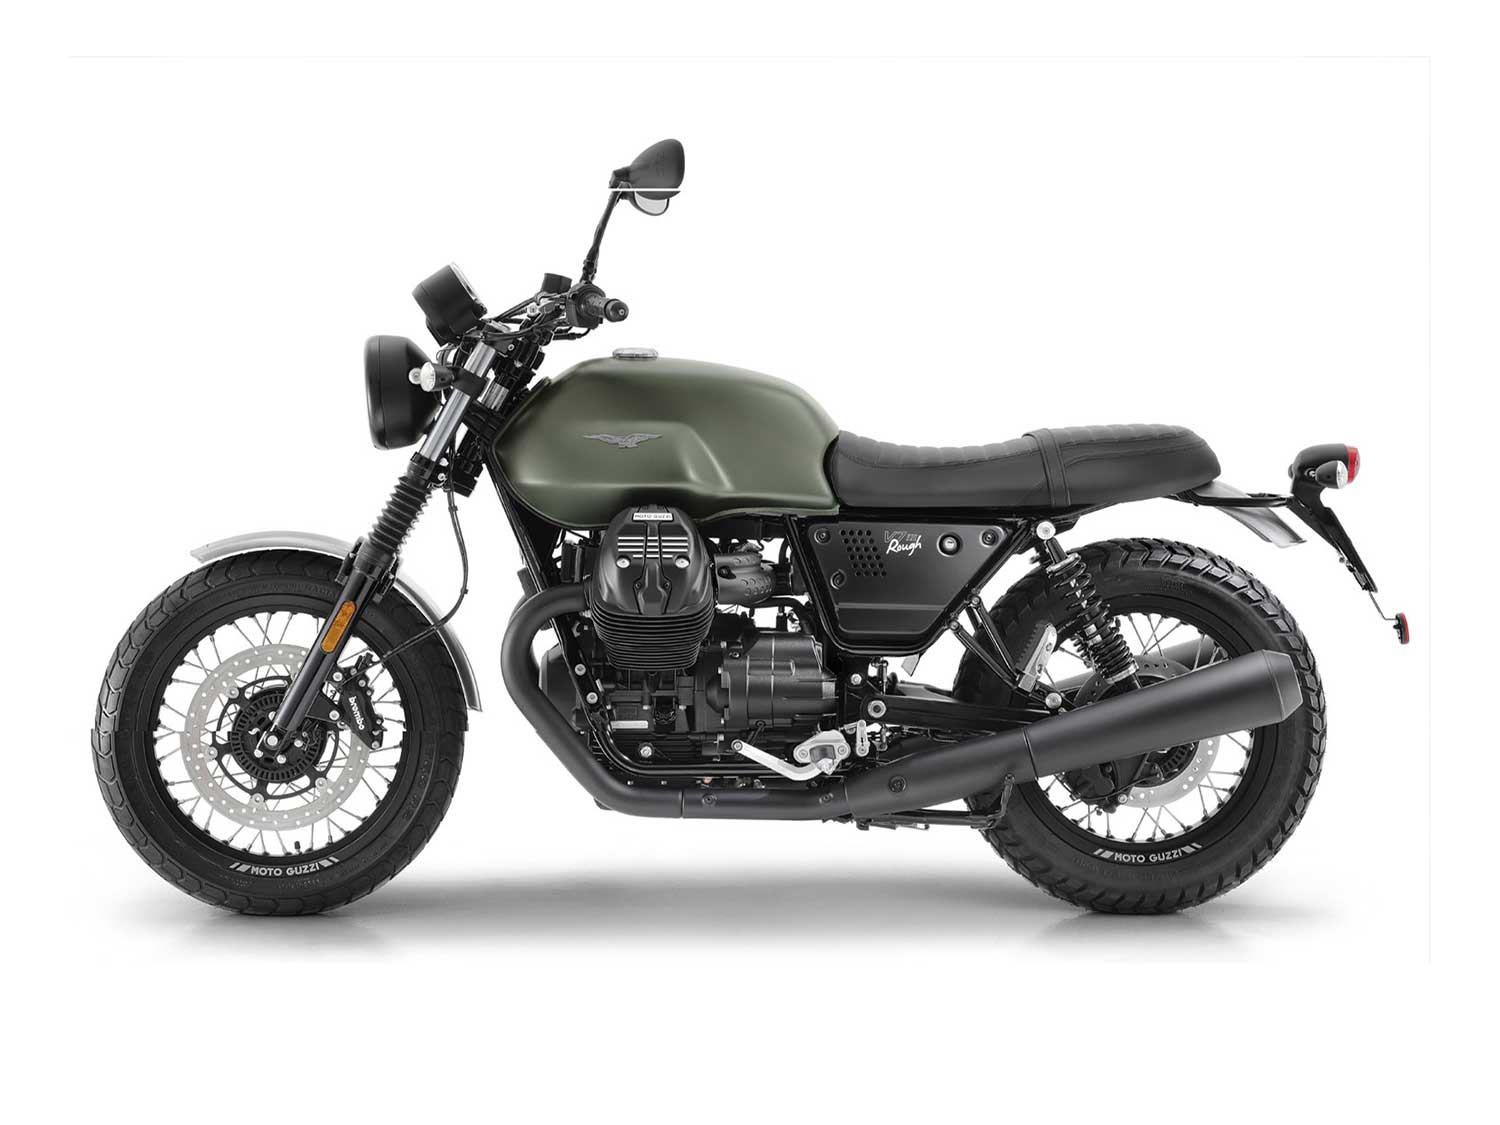 The Rough adopts a scrambler-ish approach, with knobbies and fork gaiters meant to sell the appearance of dirt-worthiness.